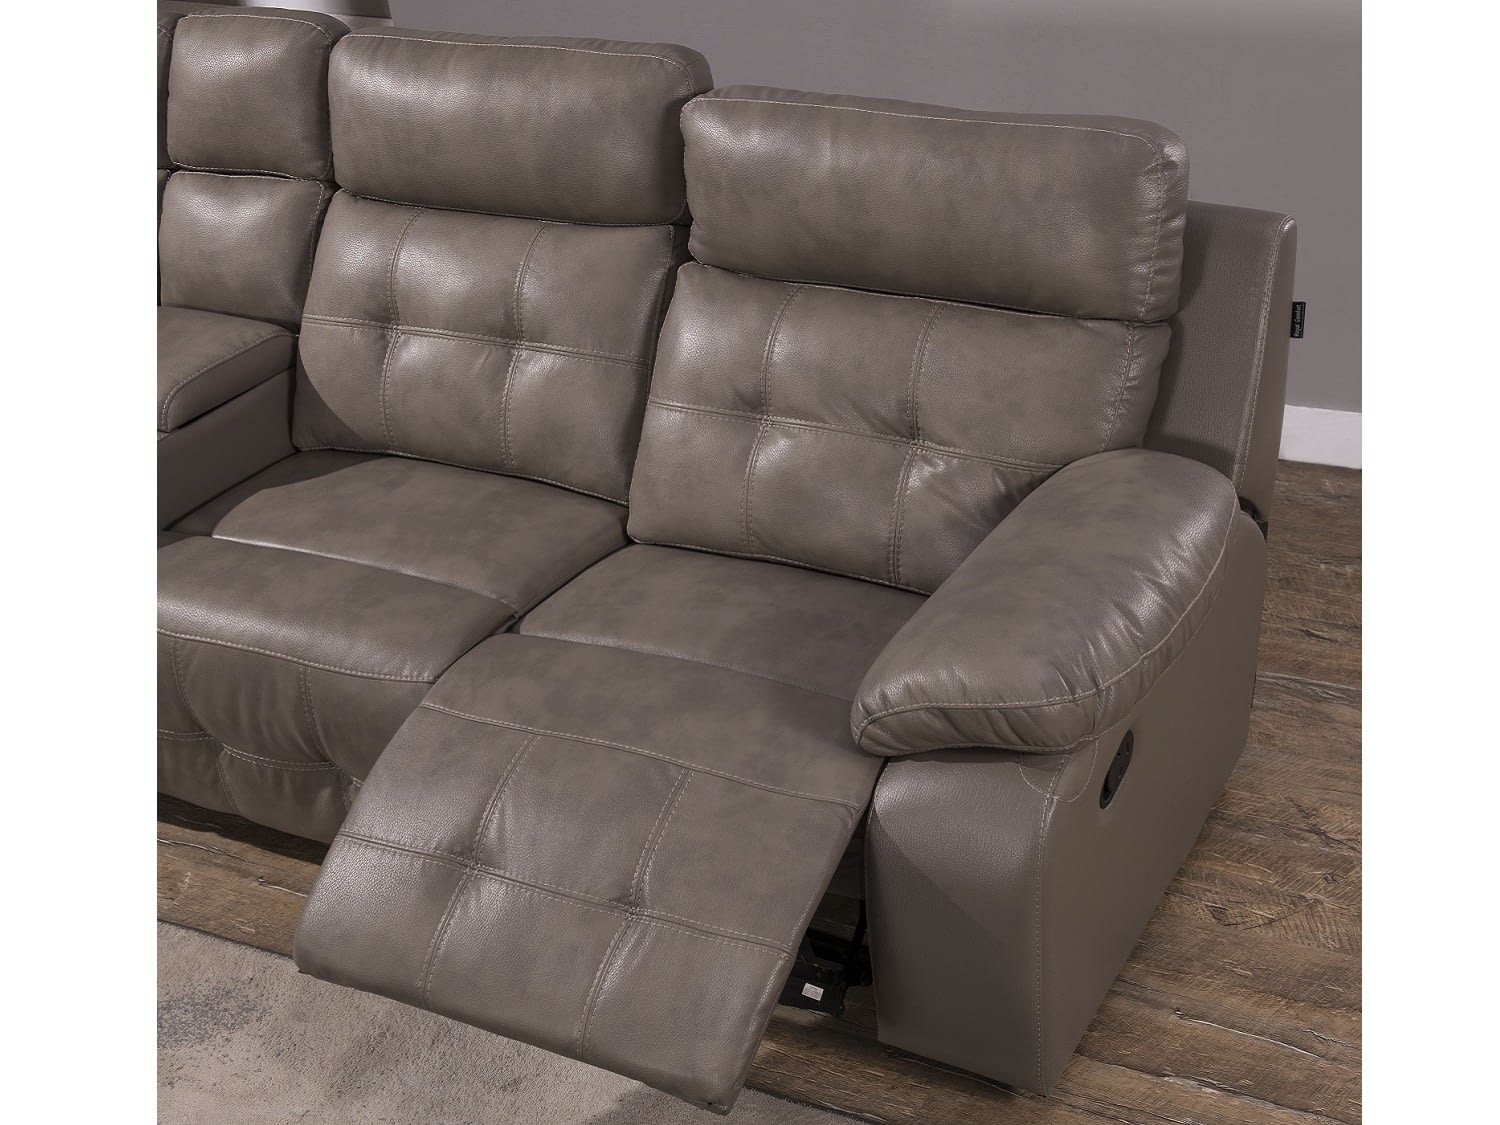 MOUNTOUR Leather Reclining Sectional - Front